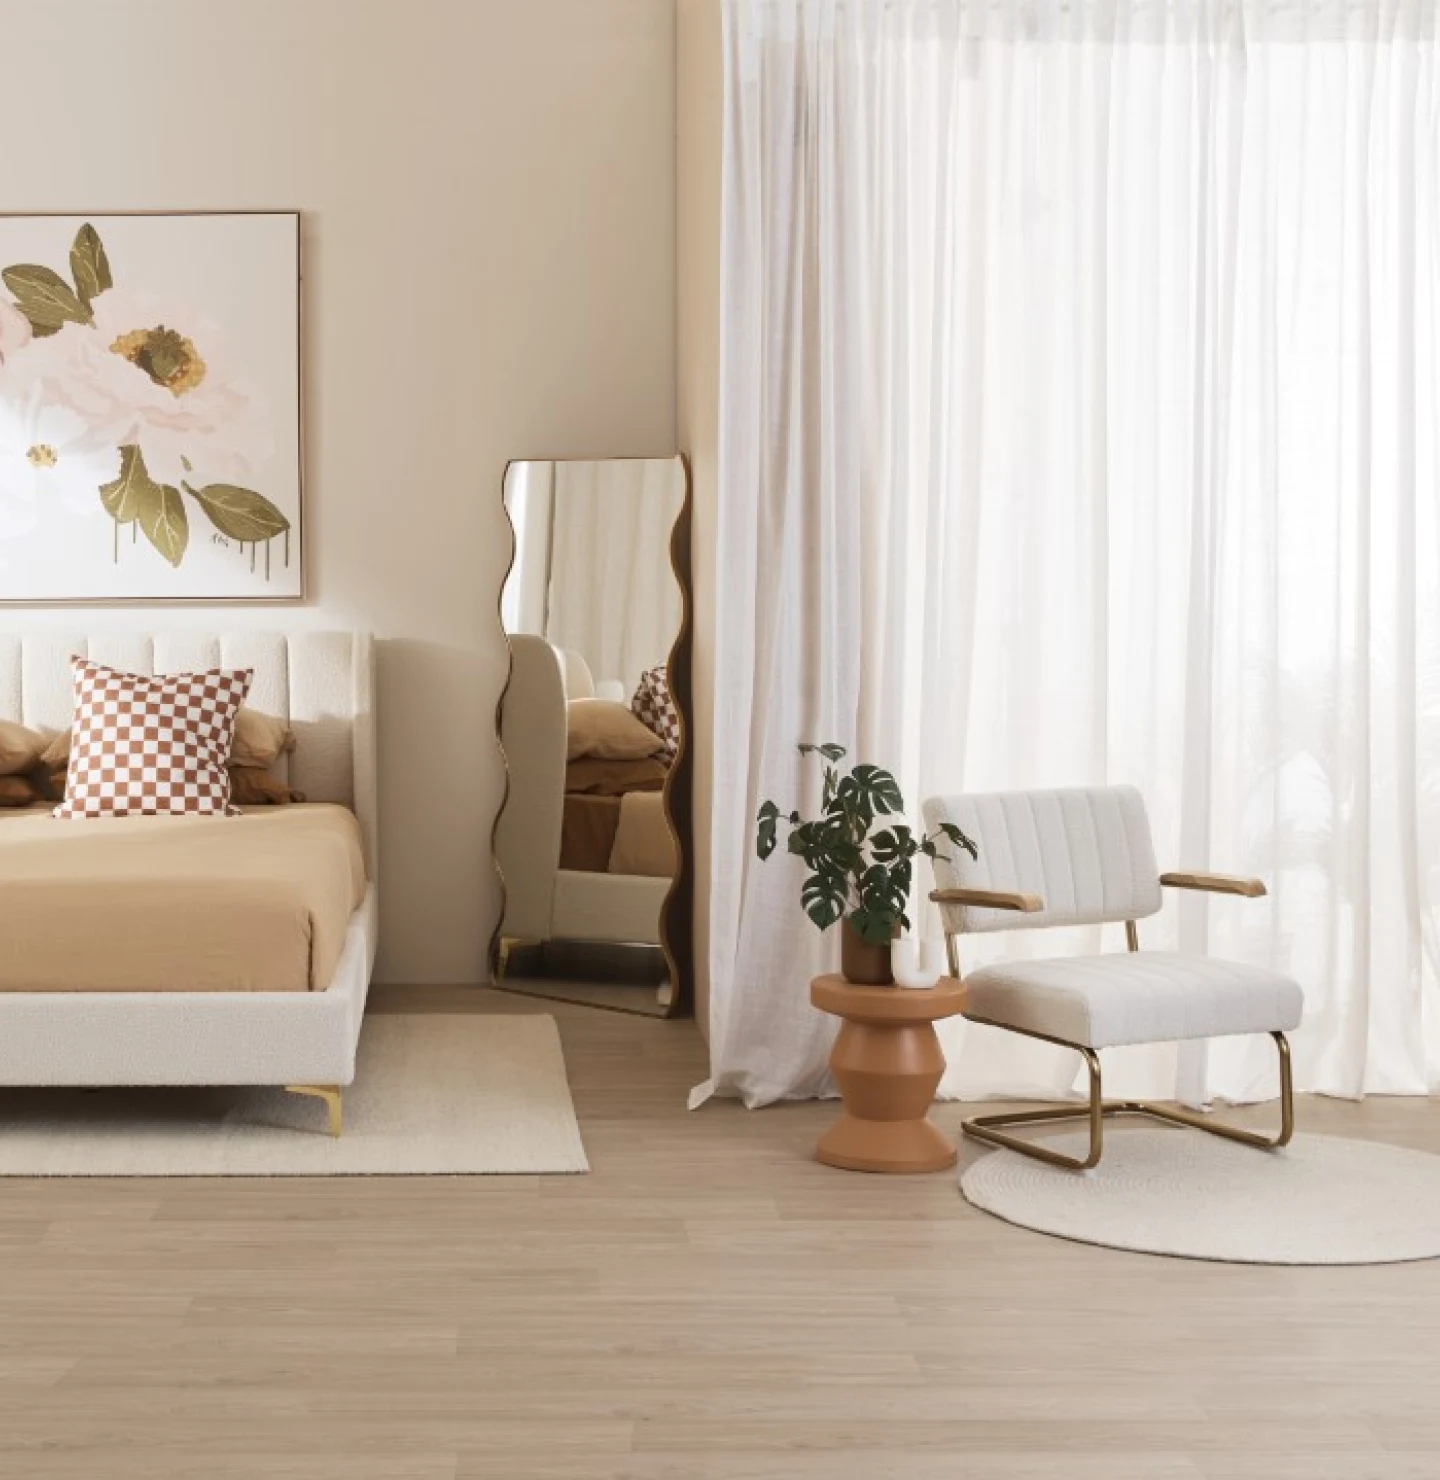 An image of a bedroom painted with tan undertones. To the left, a brownish tan bed with a checkered pillow and a floral painting above it with a curvy mirror in the center. To the right, a white and gold metal chair sitting next to a plant. 